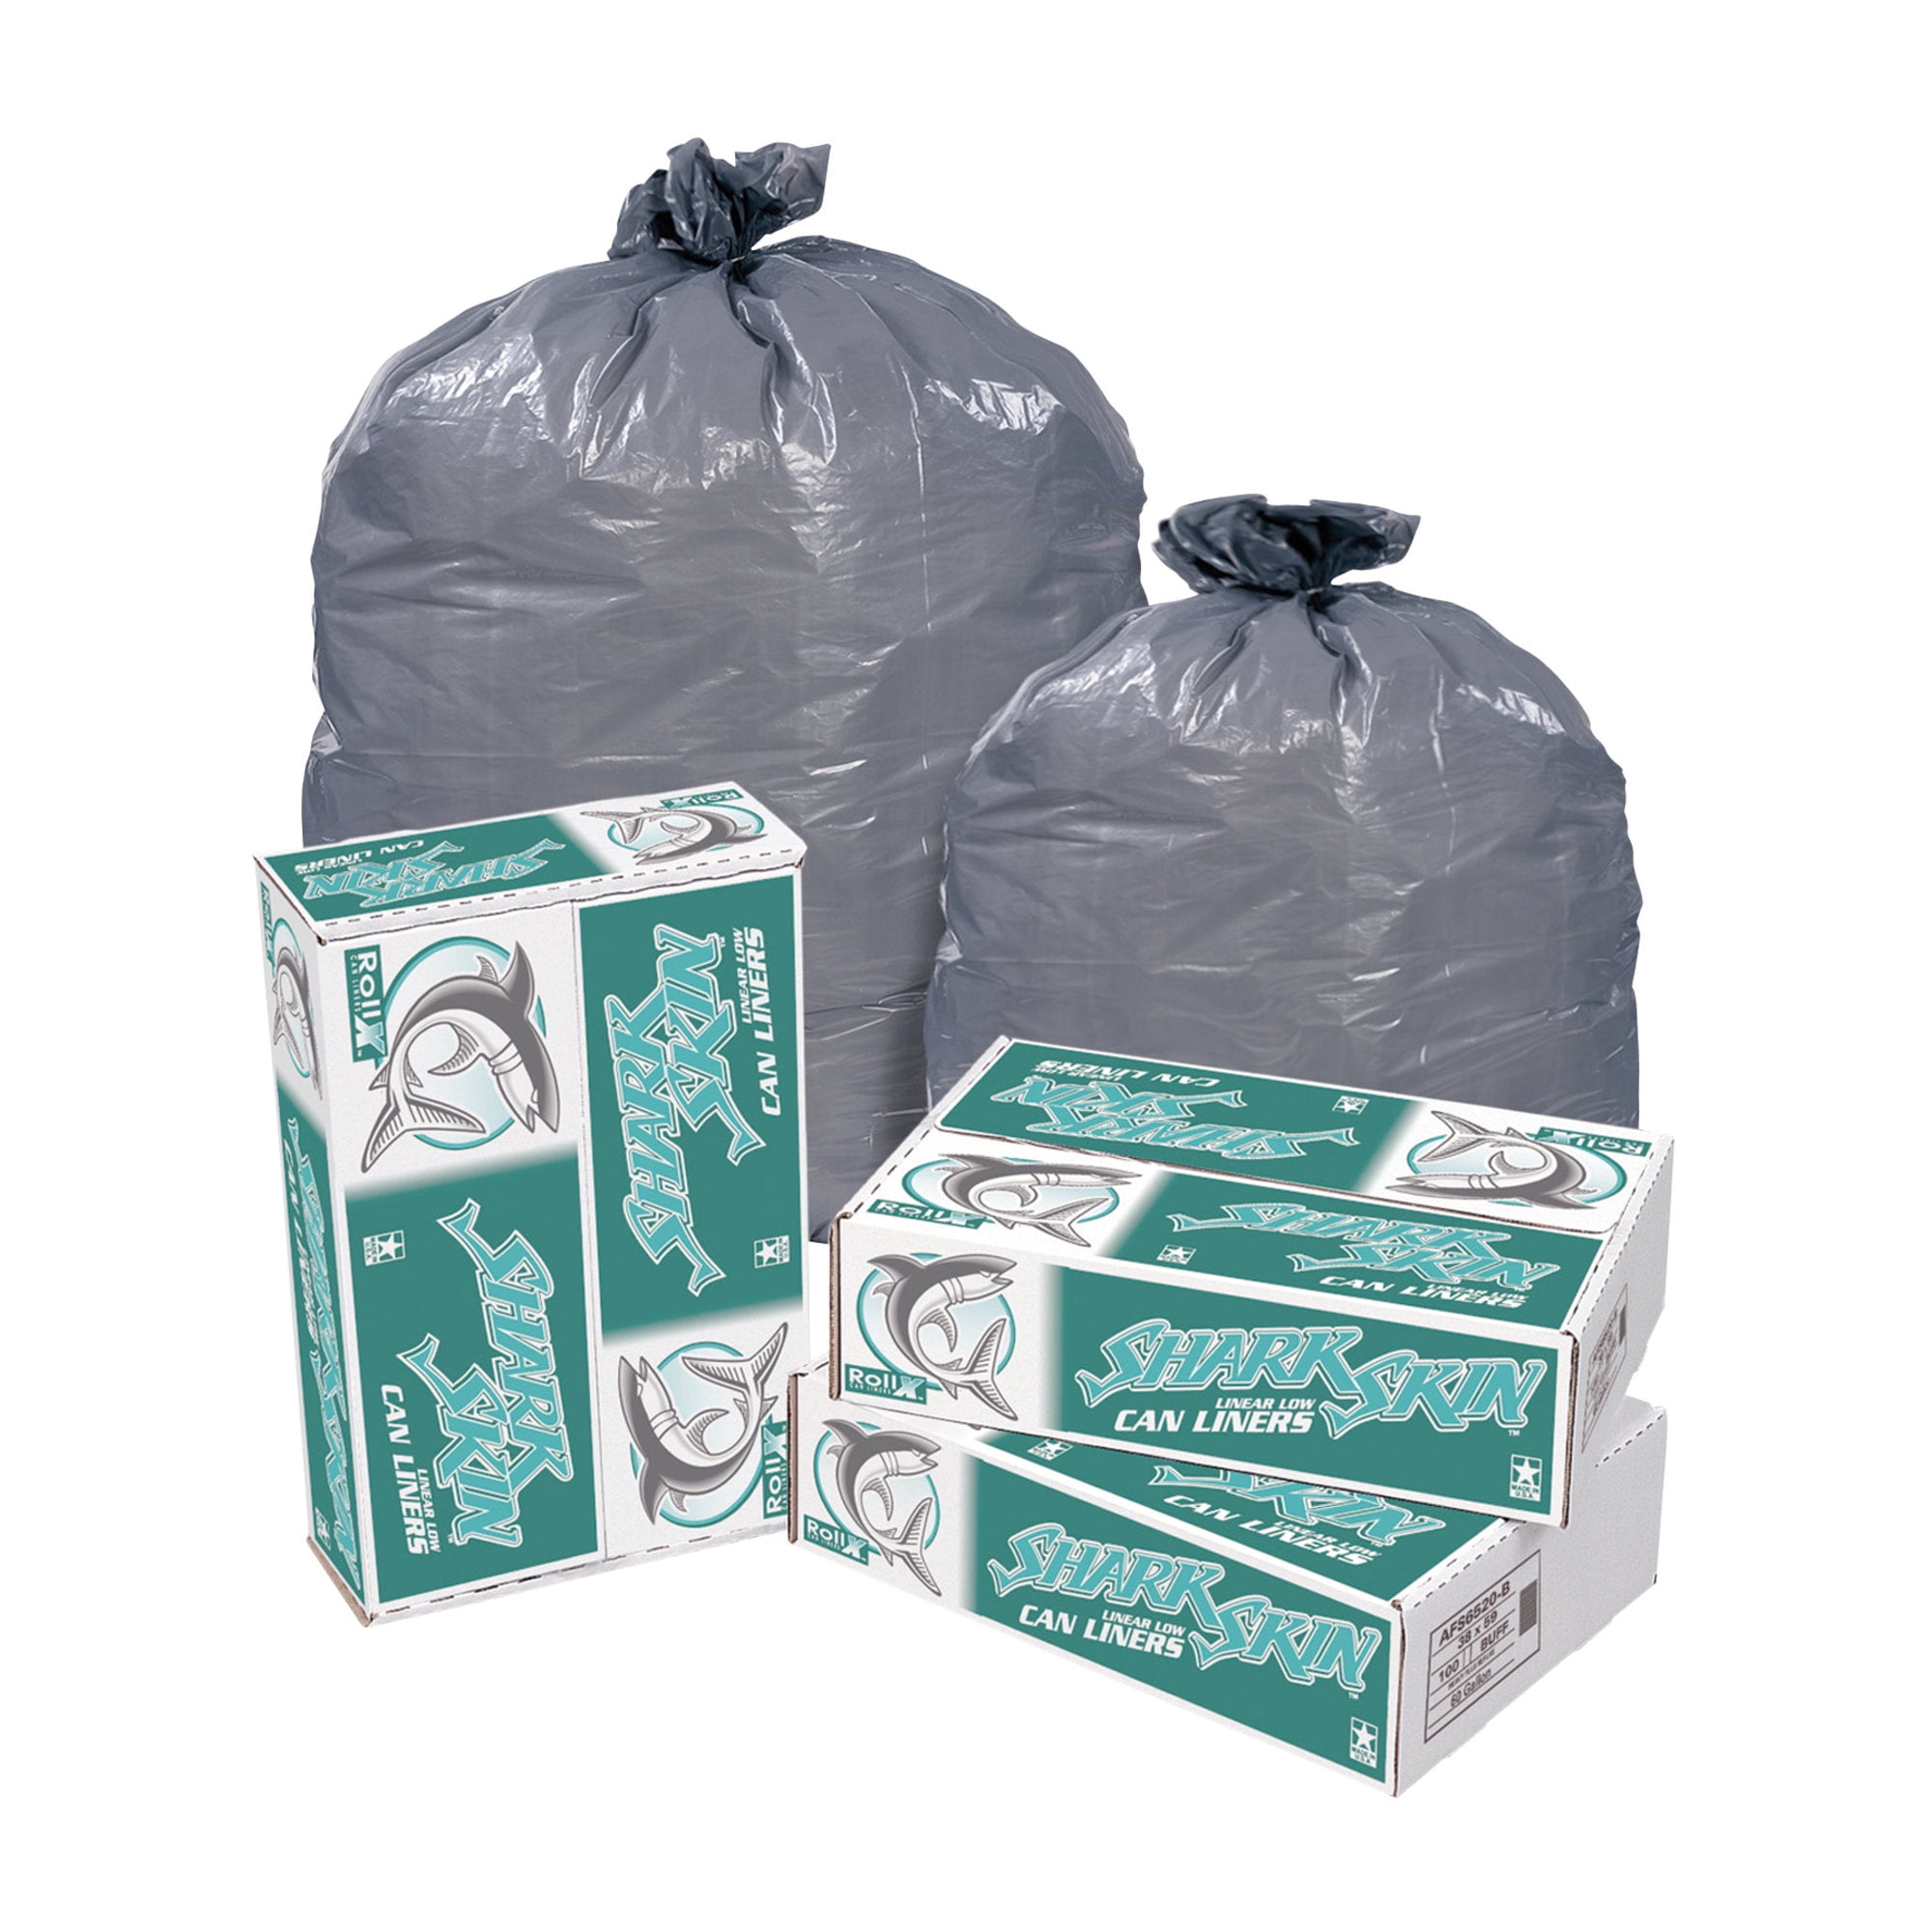 Simply Bio 13 Gallons Polyethylene Plastic Recycling Bags - 50 Count